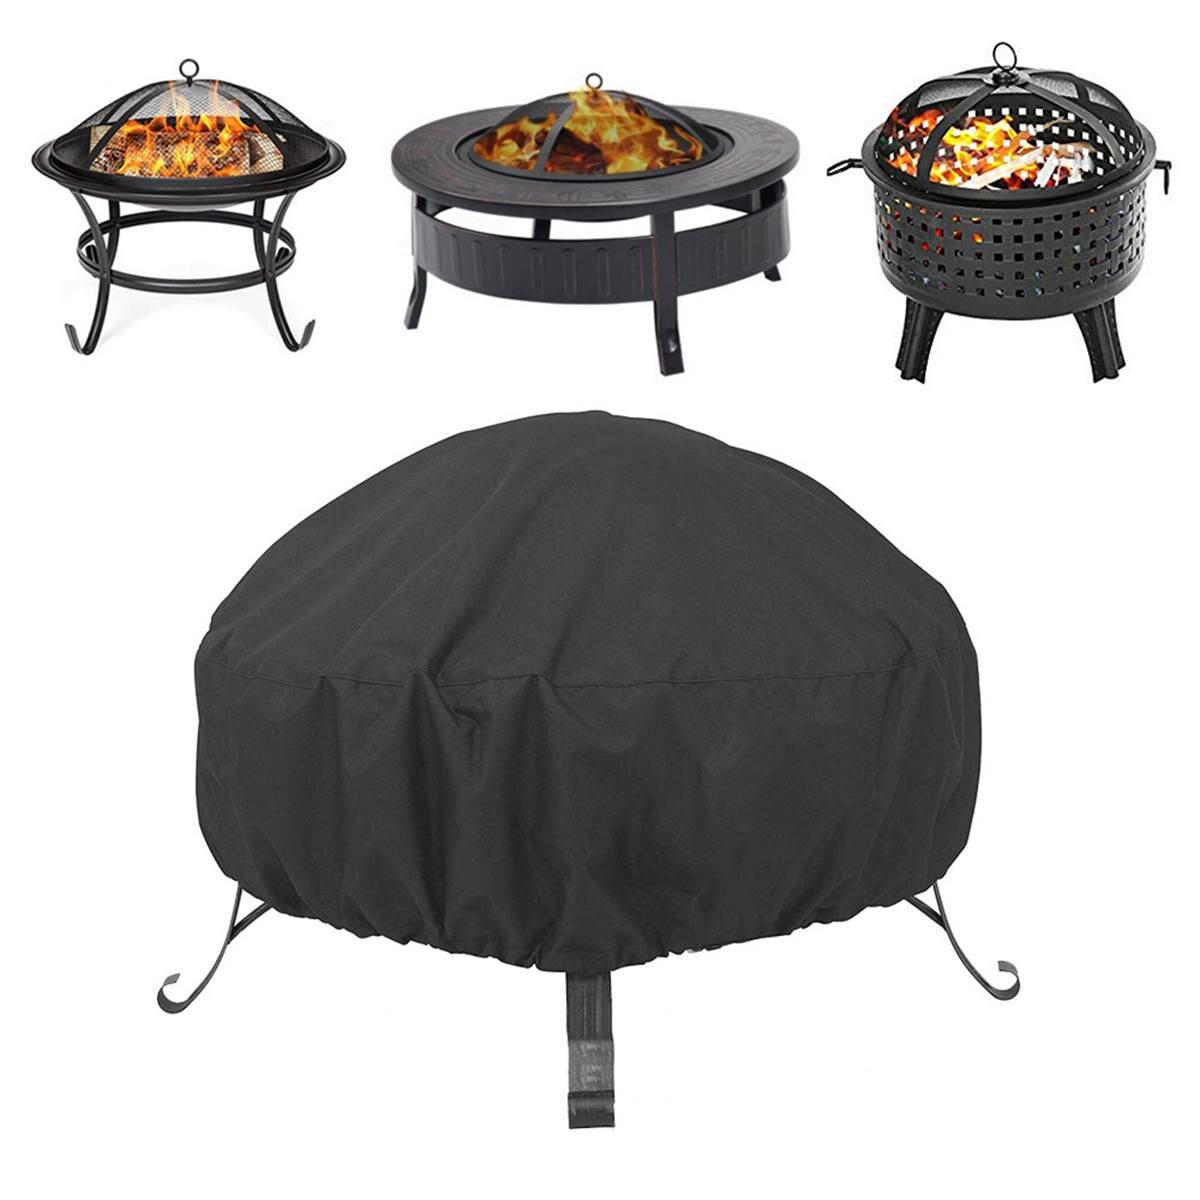 85x40cm Round Fire Pit Cover Waterproof UV Protector BBQ Grill Cover Outdoor Camping Travel